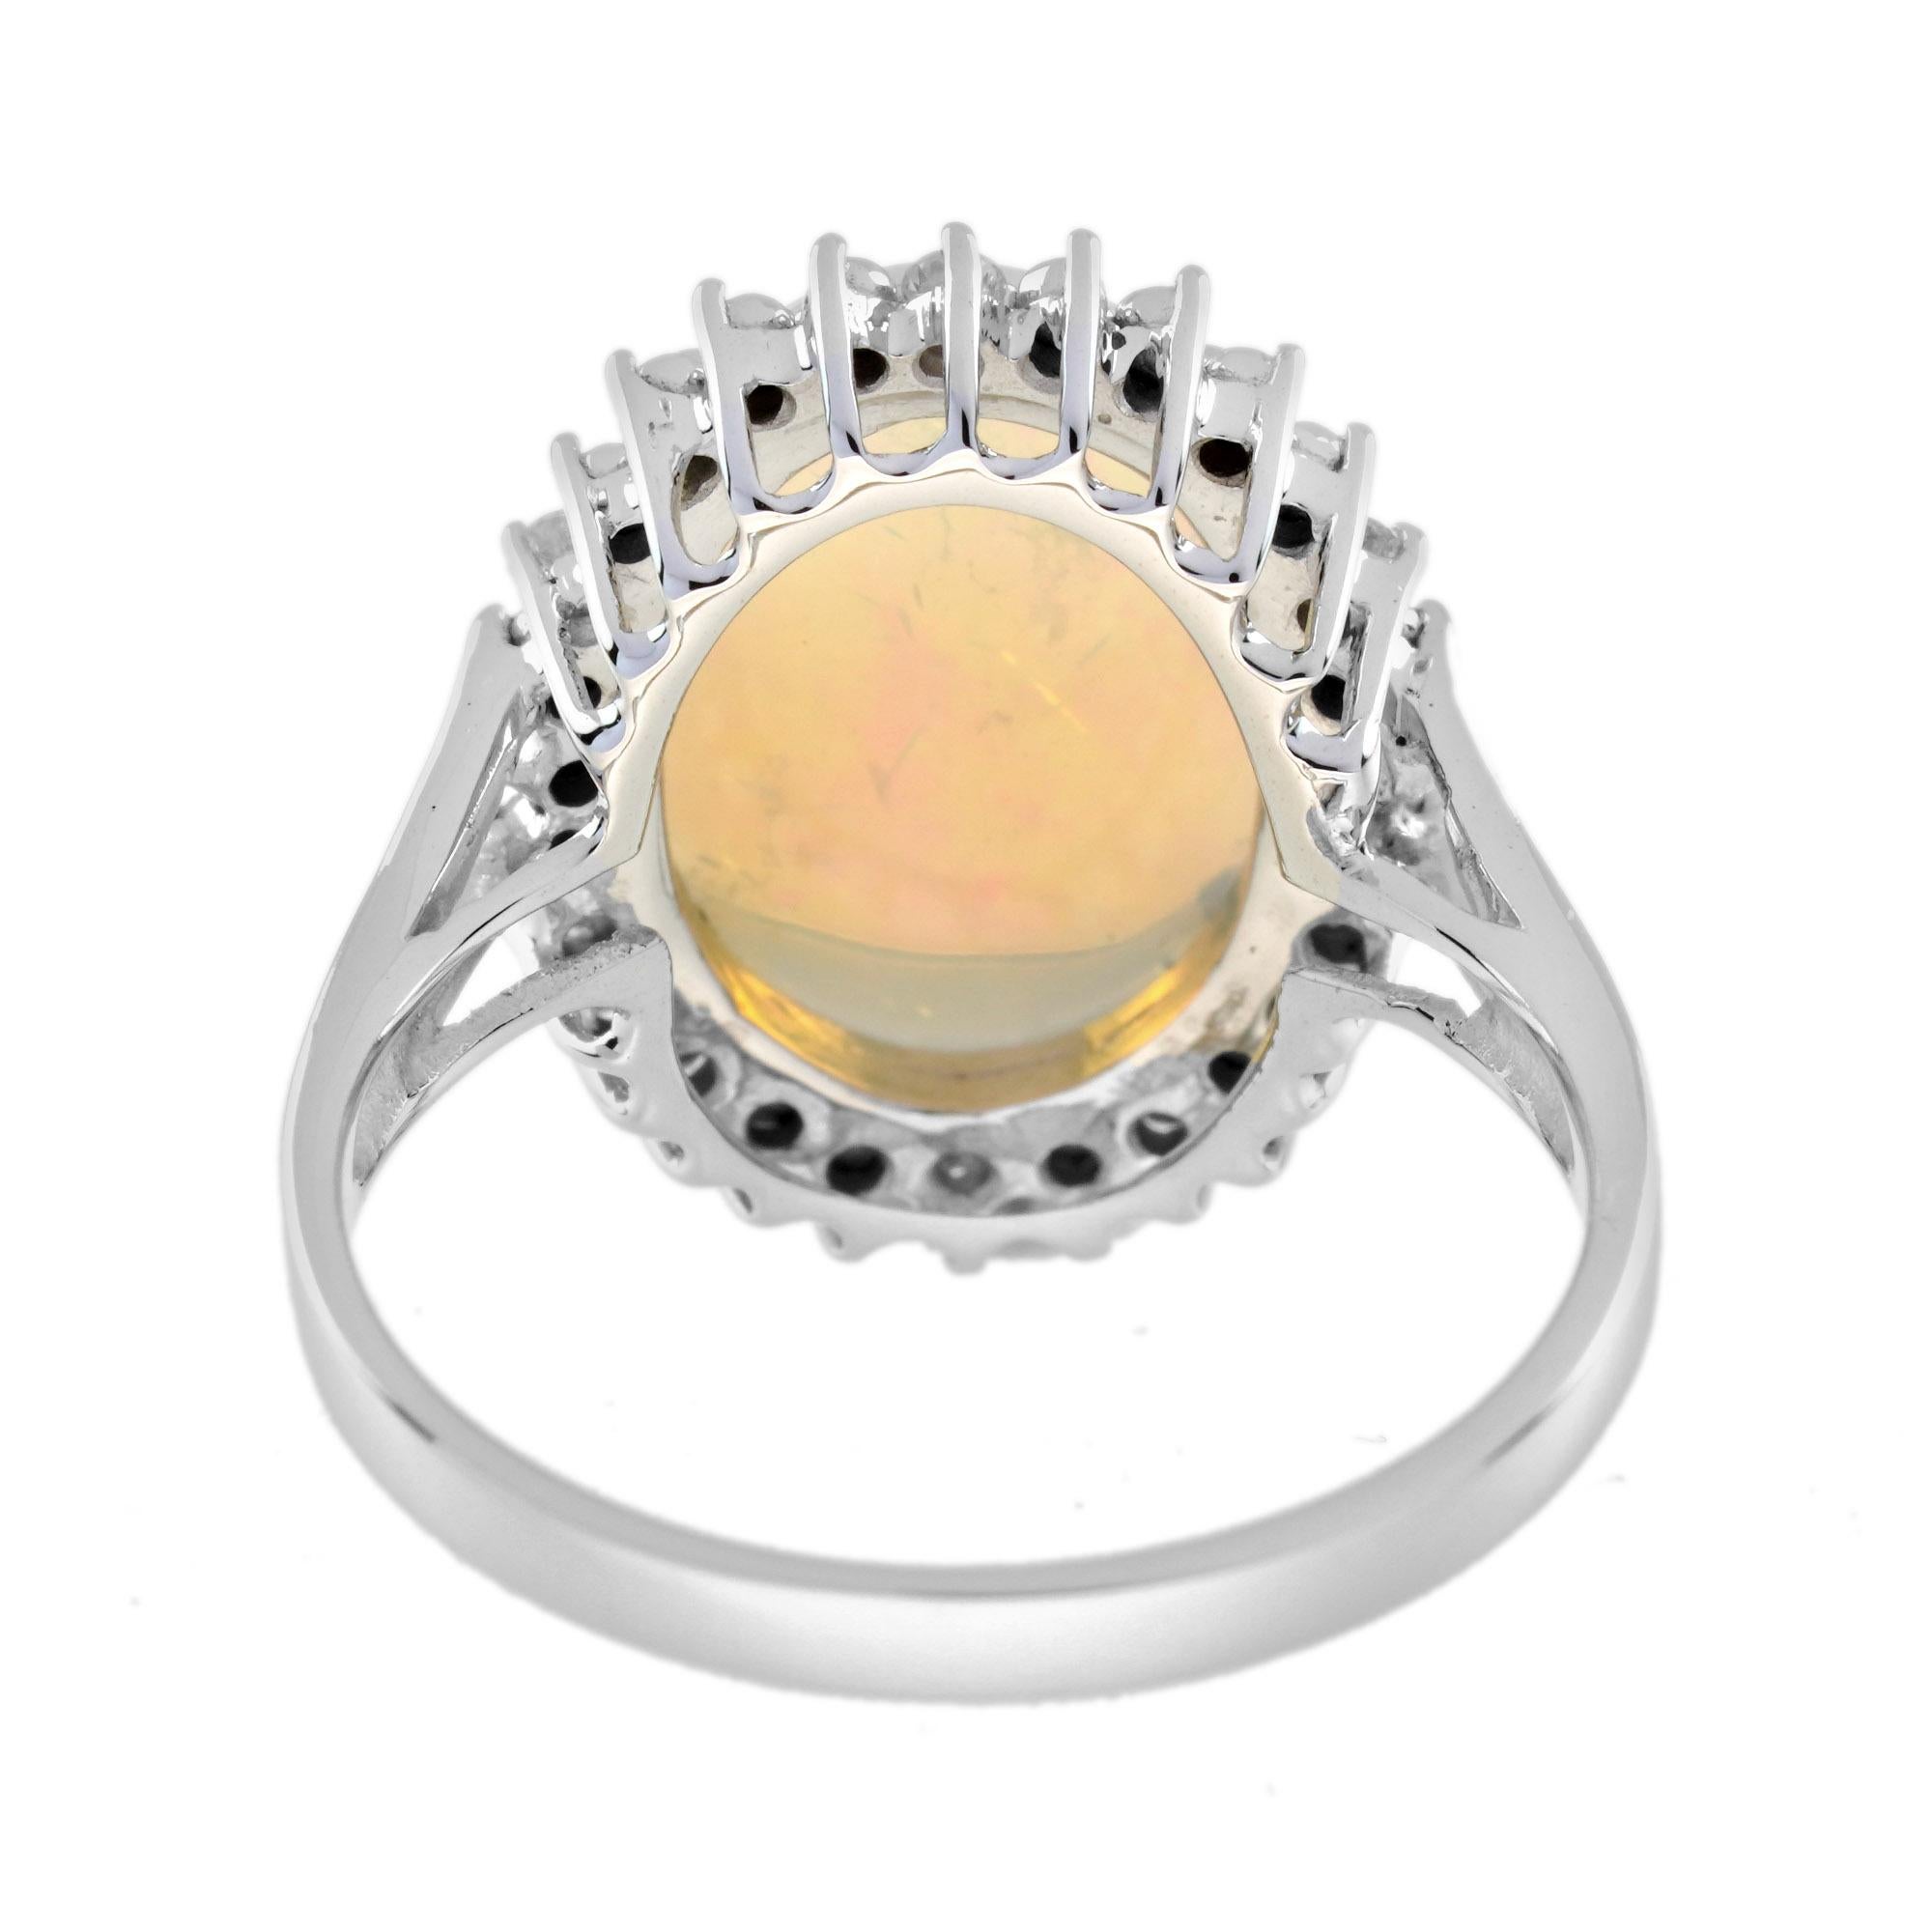 Women's 2.53 Ct. Opal and Diamond Vintage Style Cocktail Ring in 9K White Gold